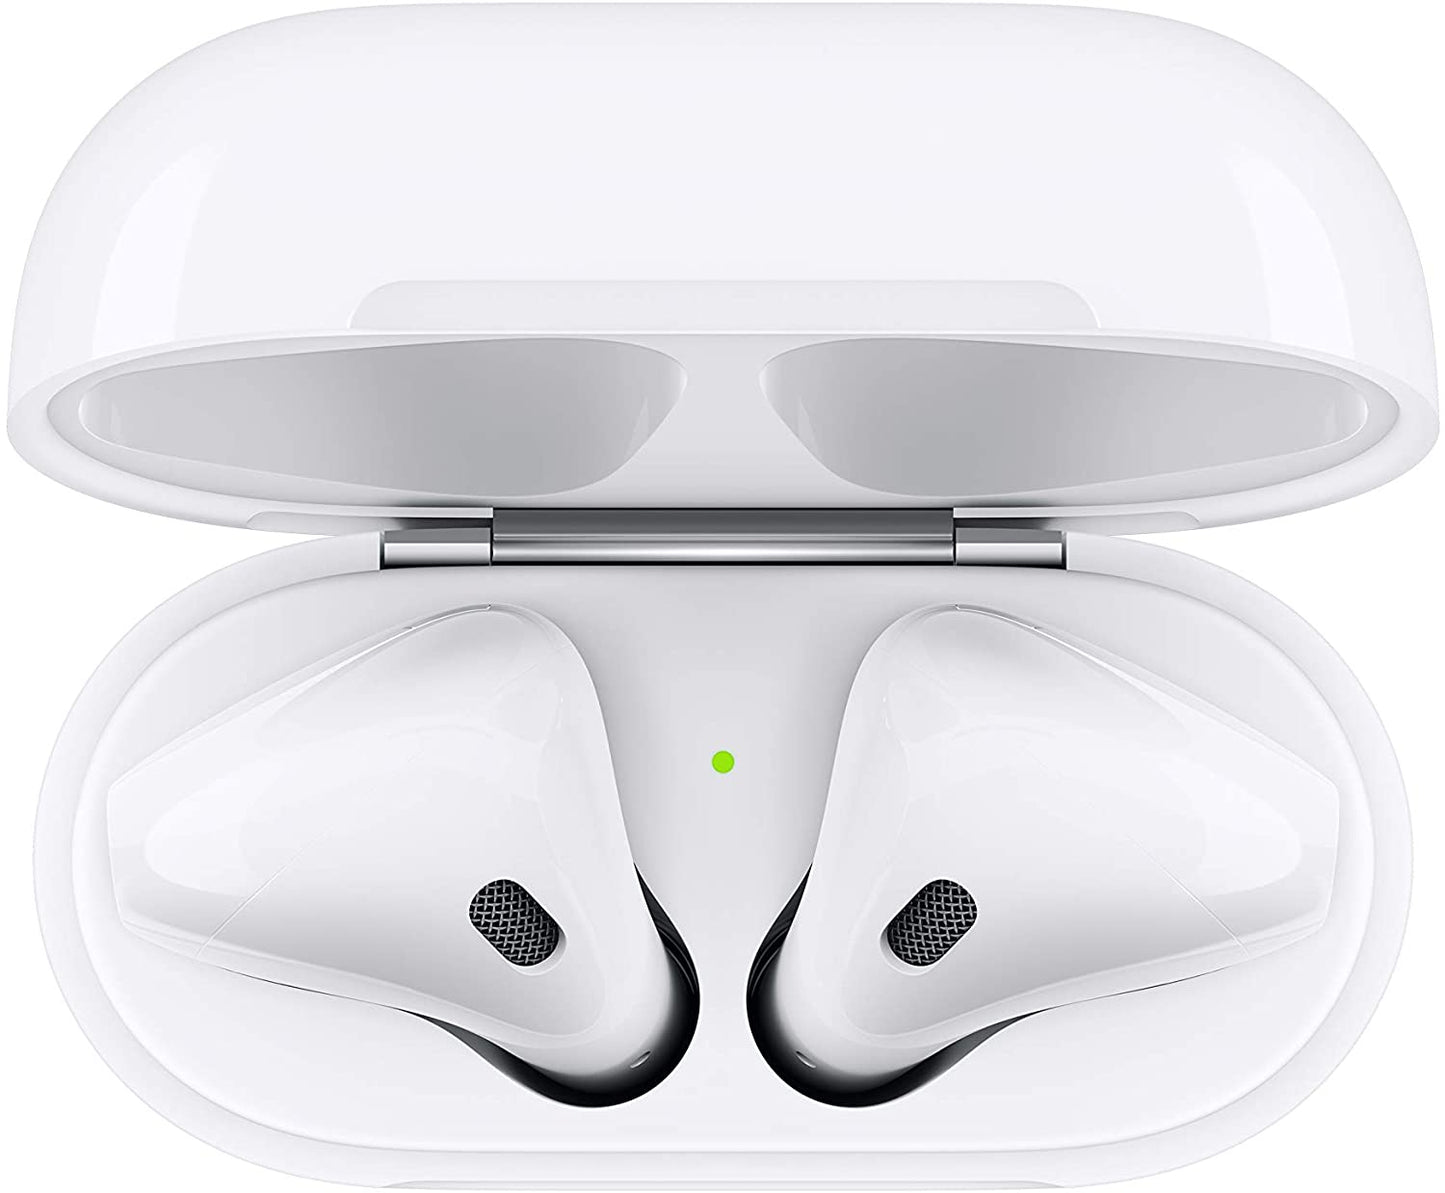 Airpods (2Nd Generation) Wireless Ear Buds, Bluetooth Headphones with Lightning Charging Case Included, over 24 Hours of Battery Life, Effortless Setup for Iphone